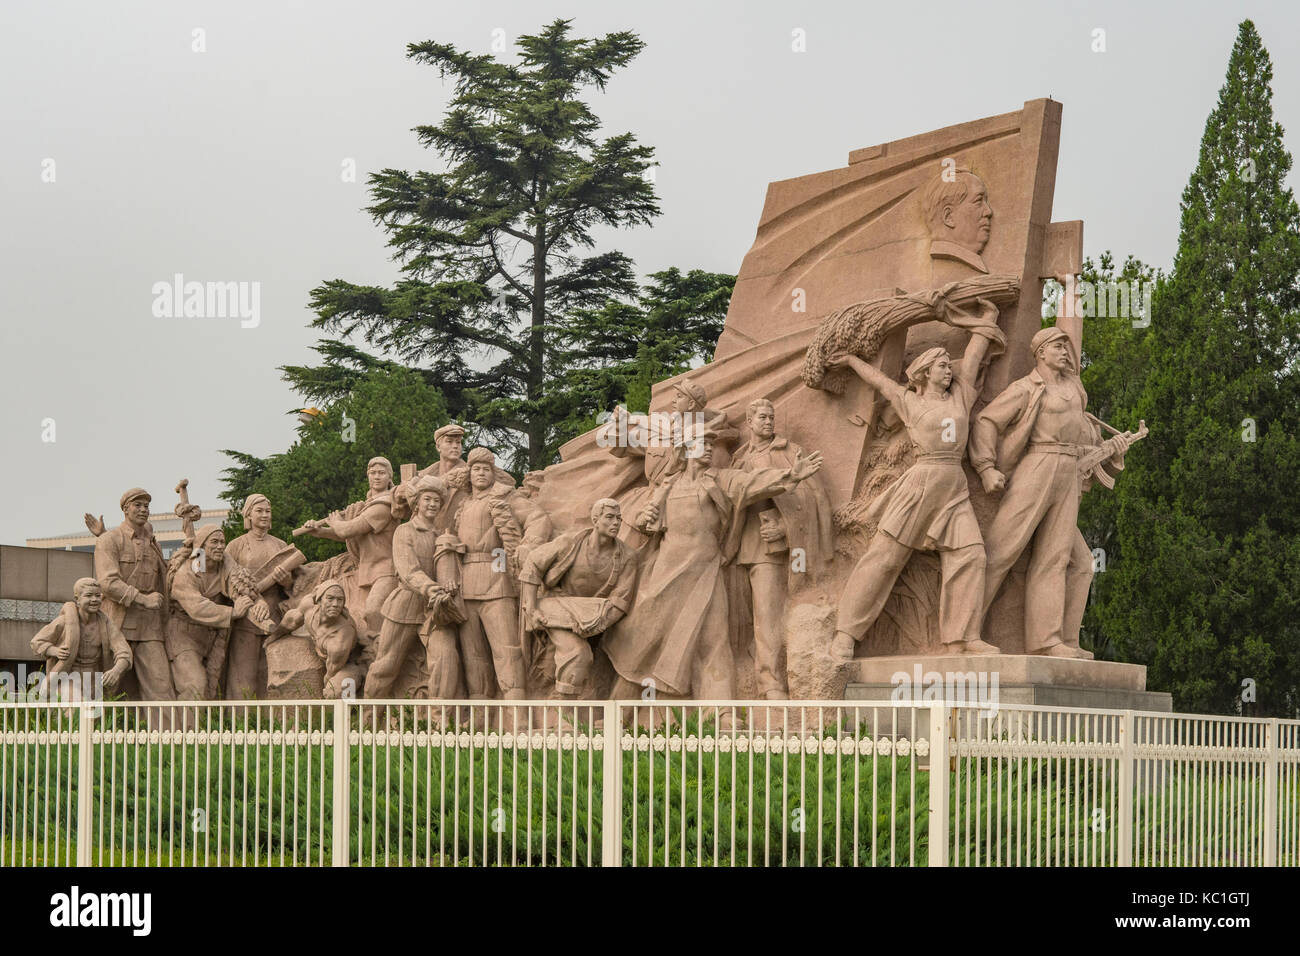 Monument to the Freedom Fighters, Tiananmen Square, Beijing, China Stock Photo